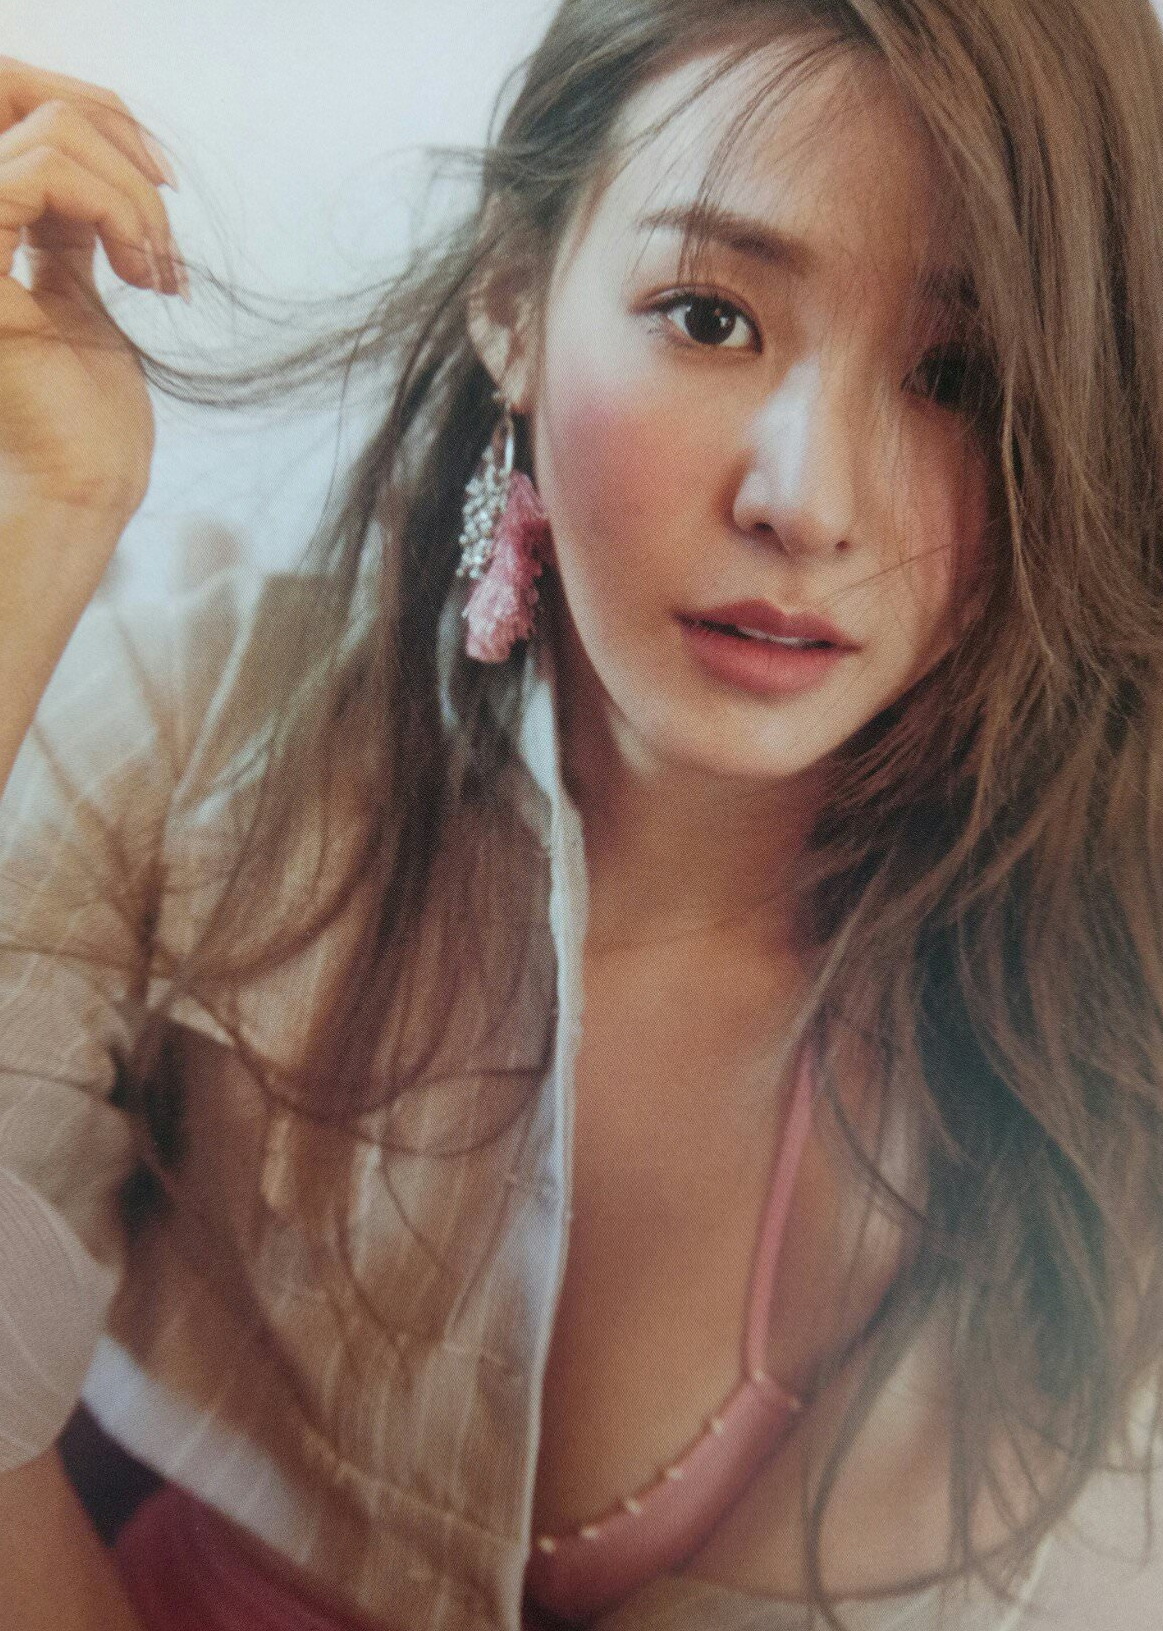 Snsd’s Tiffany Looks Amazing In A Pink Swimsuit For … Uh Whatever This Is Asian Junkie